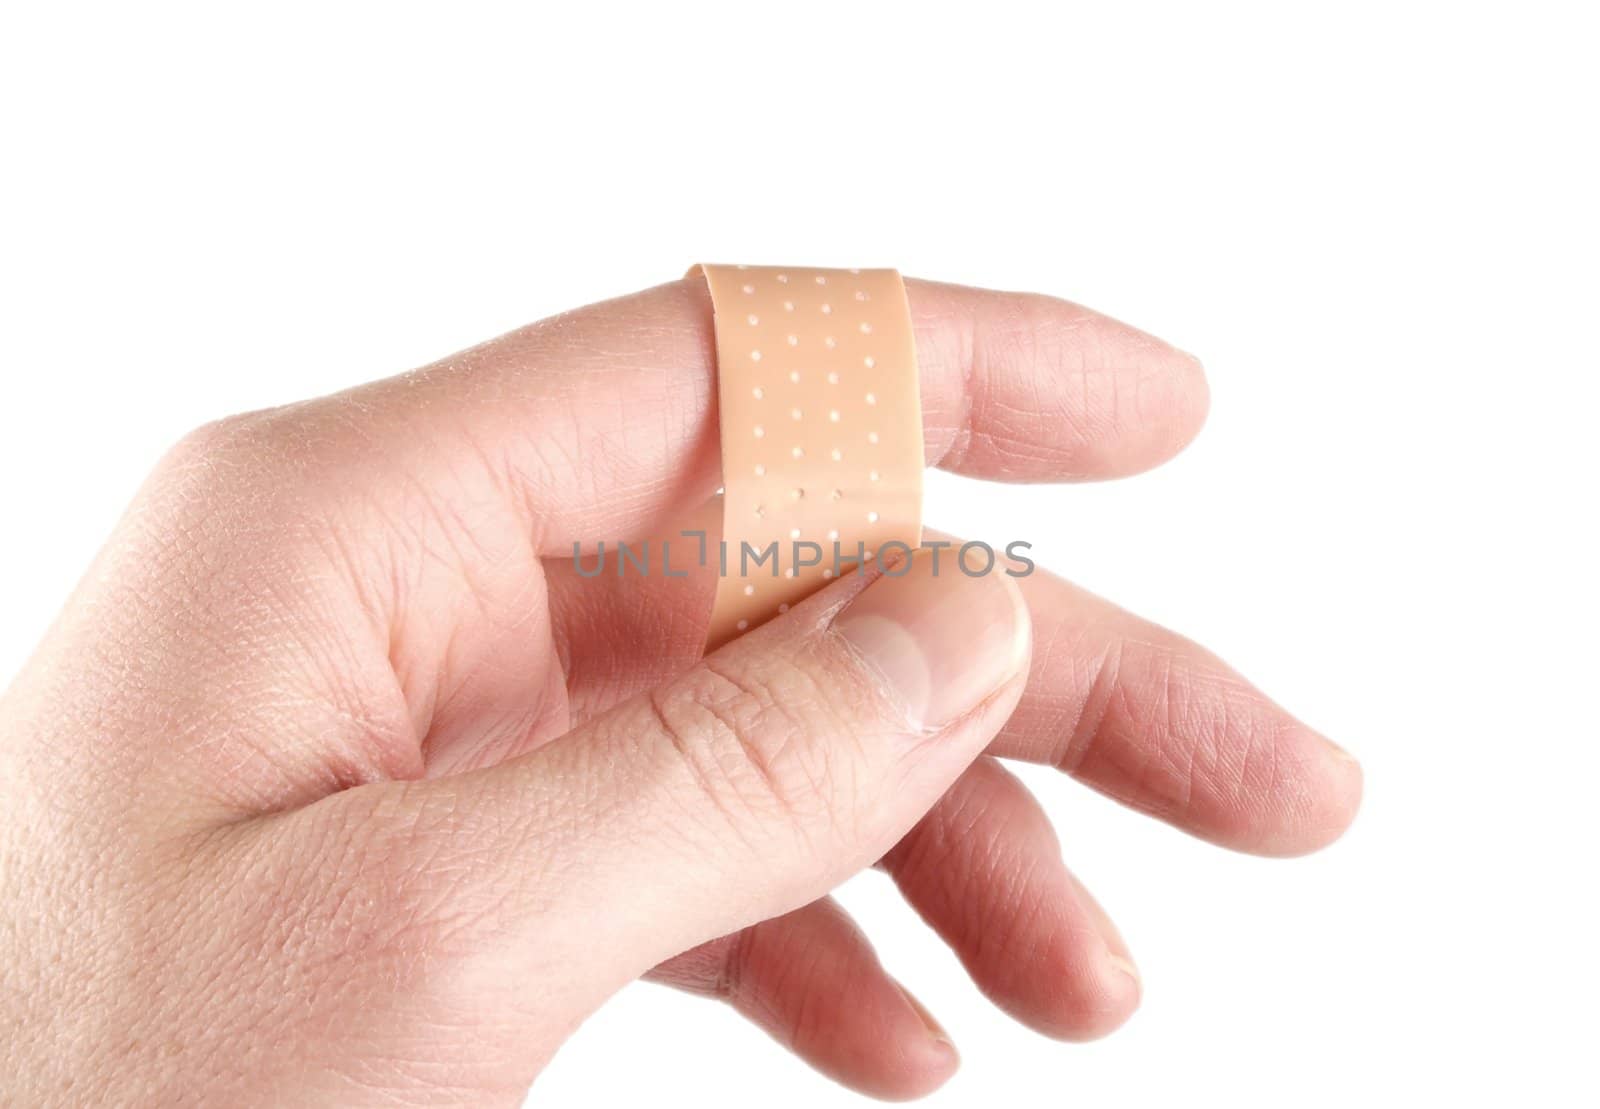 Someone attaching a patch to a finger